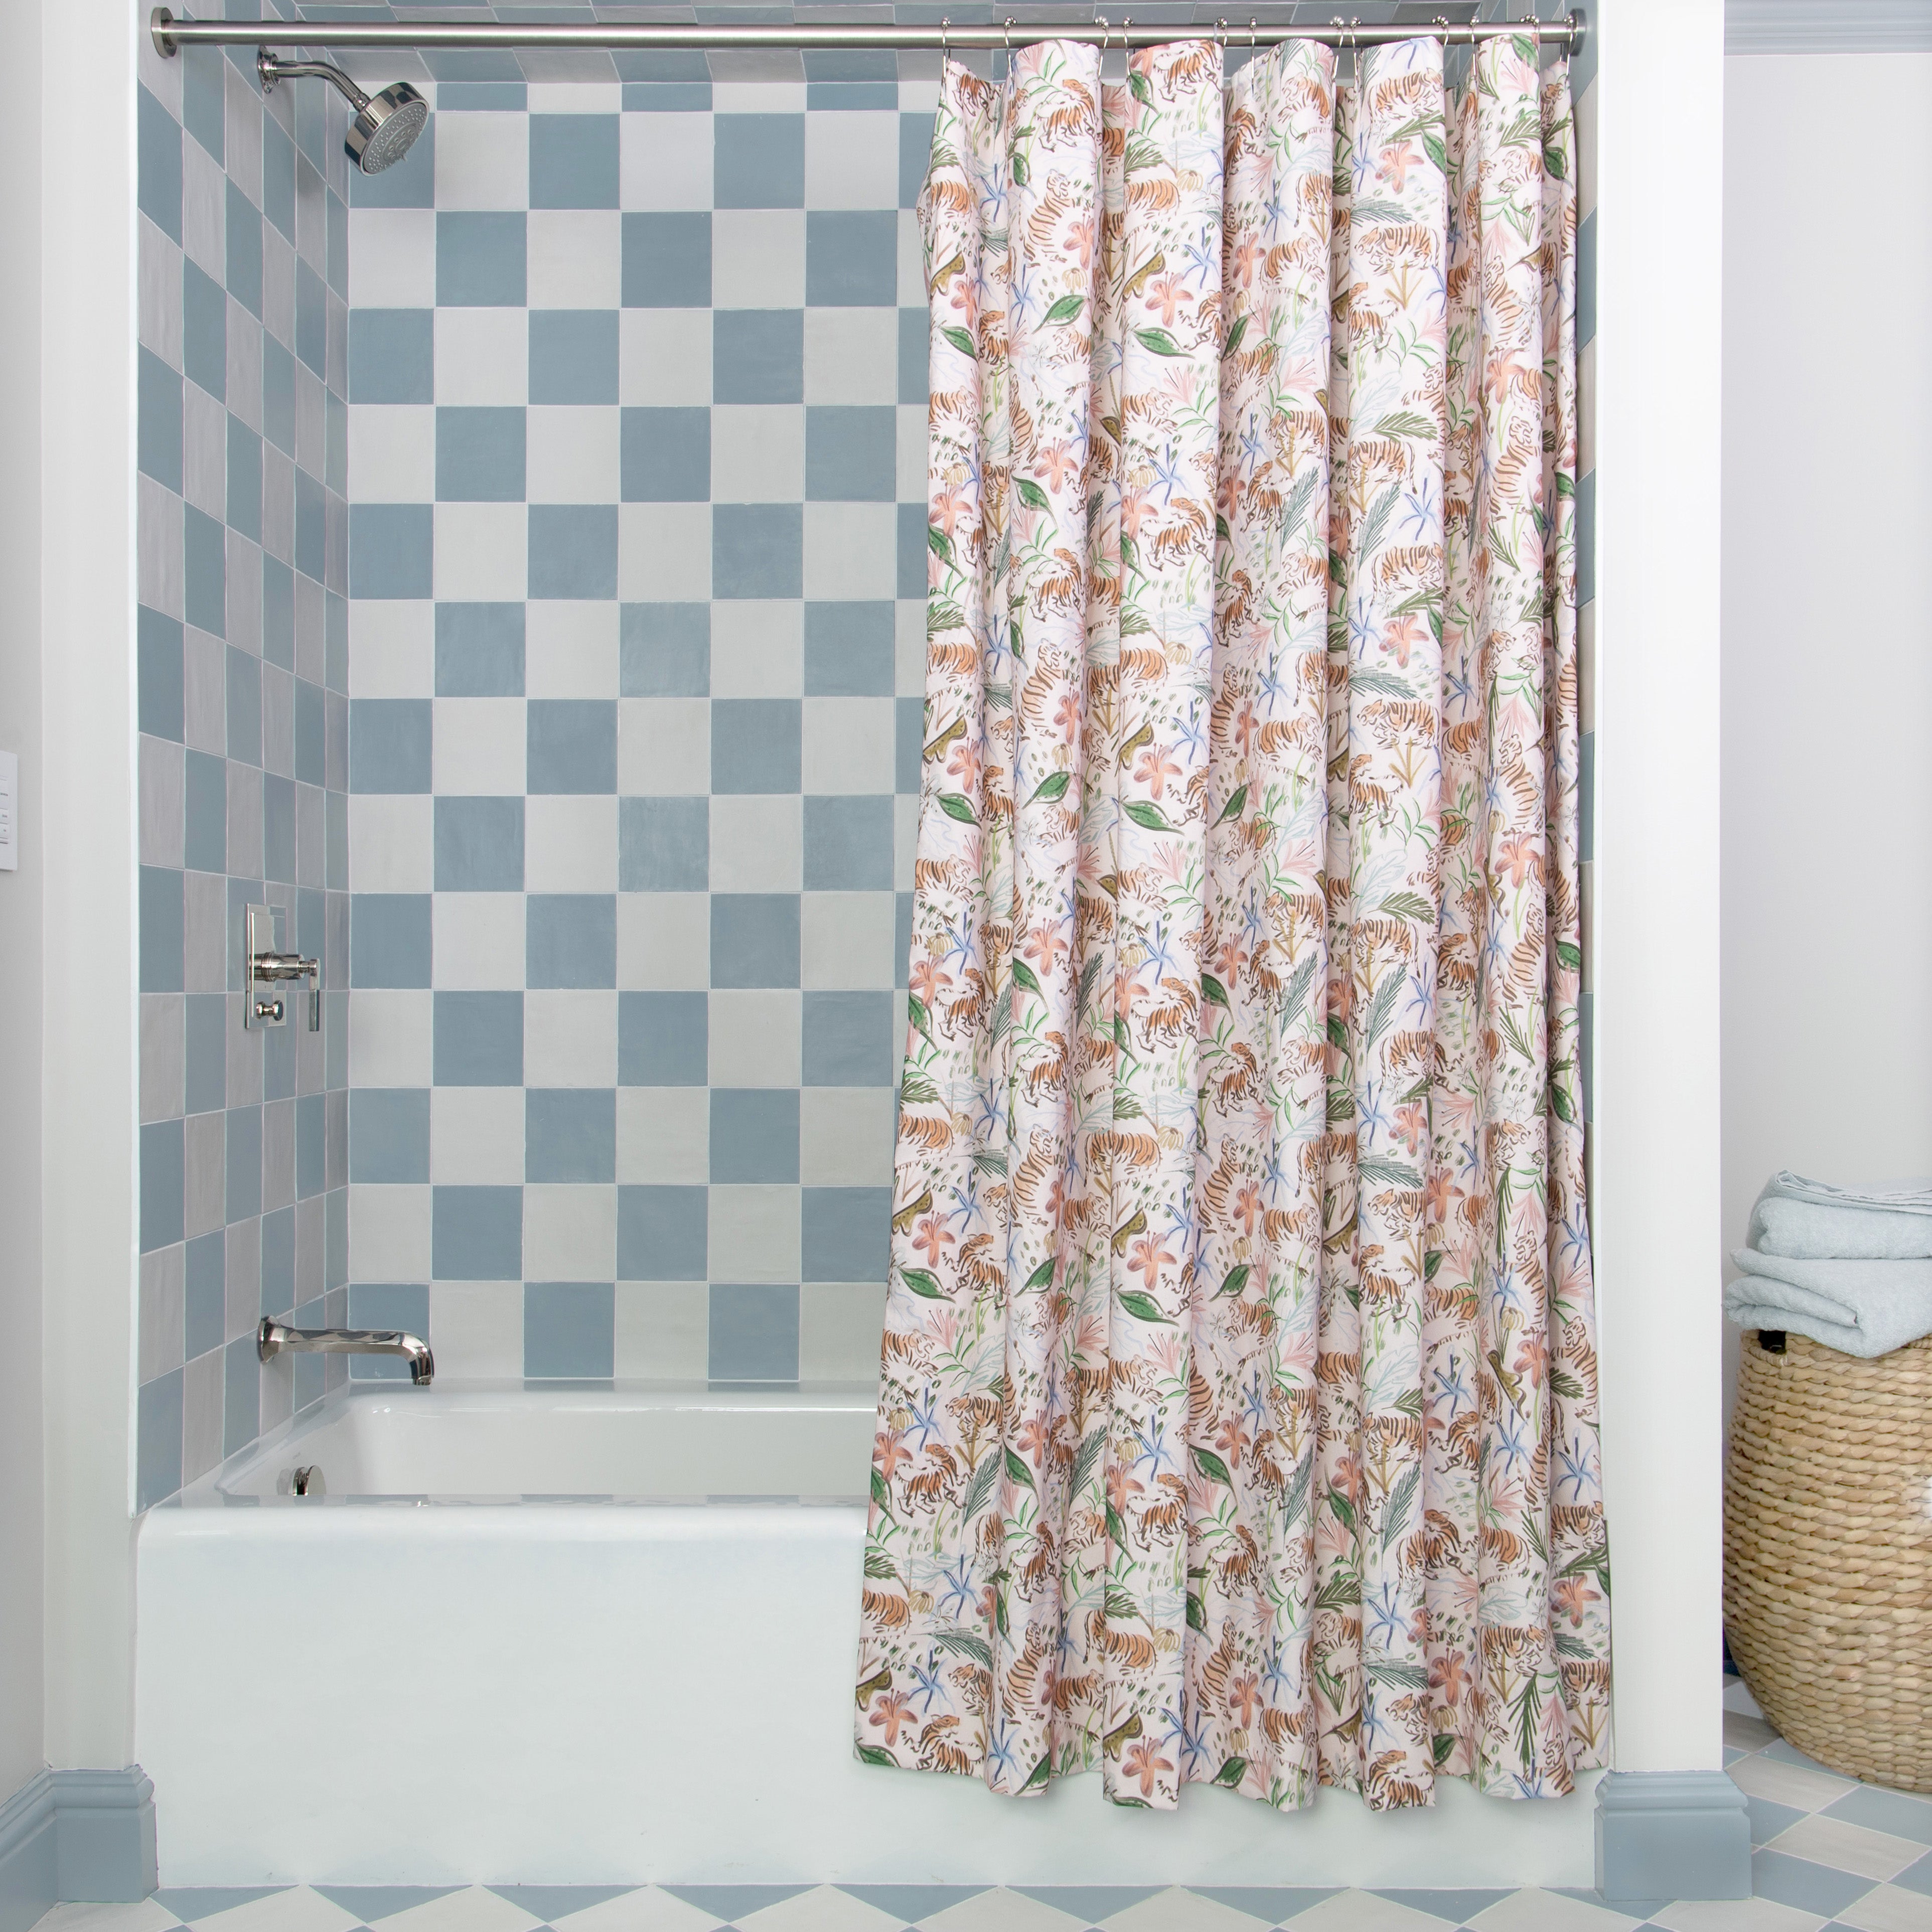 Shower Curtain Size Guide